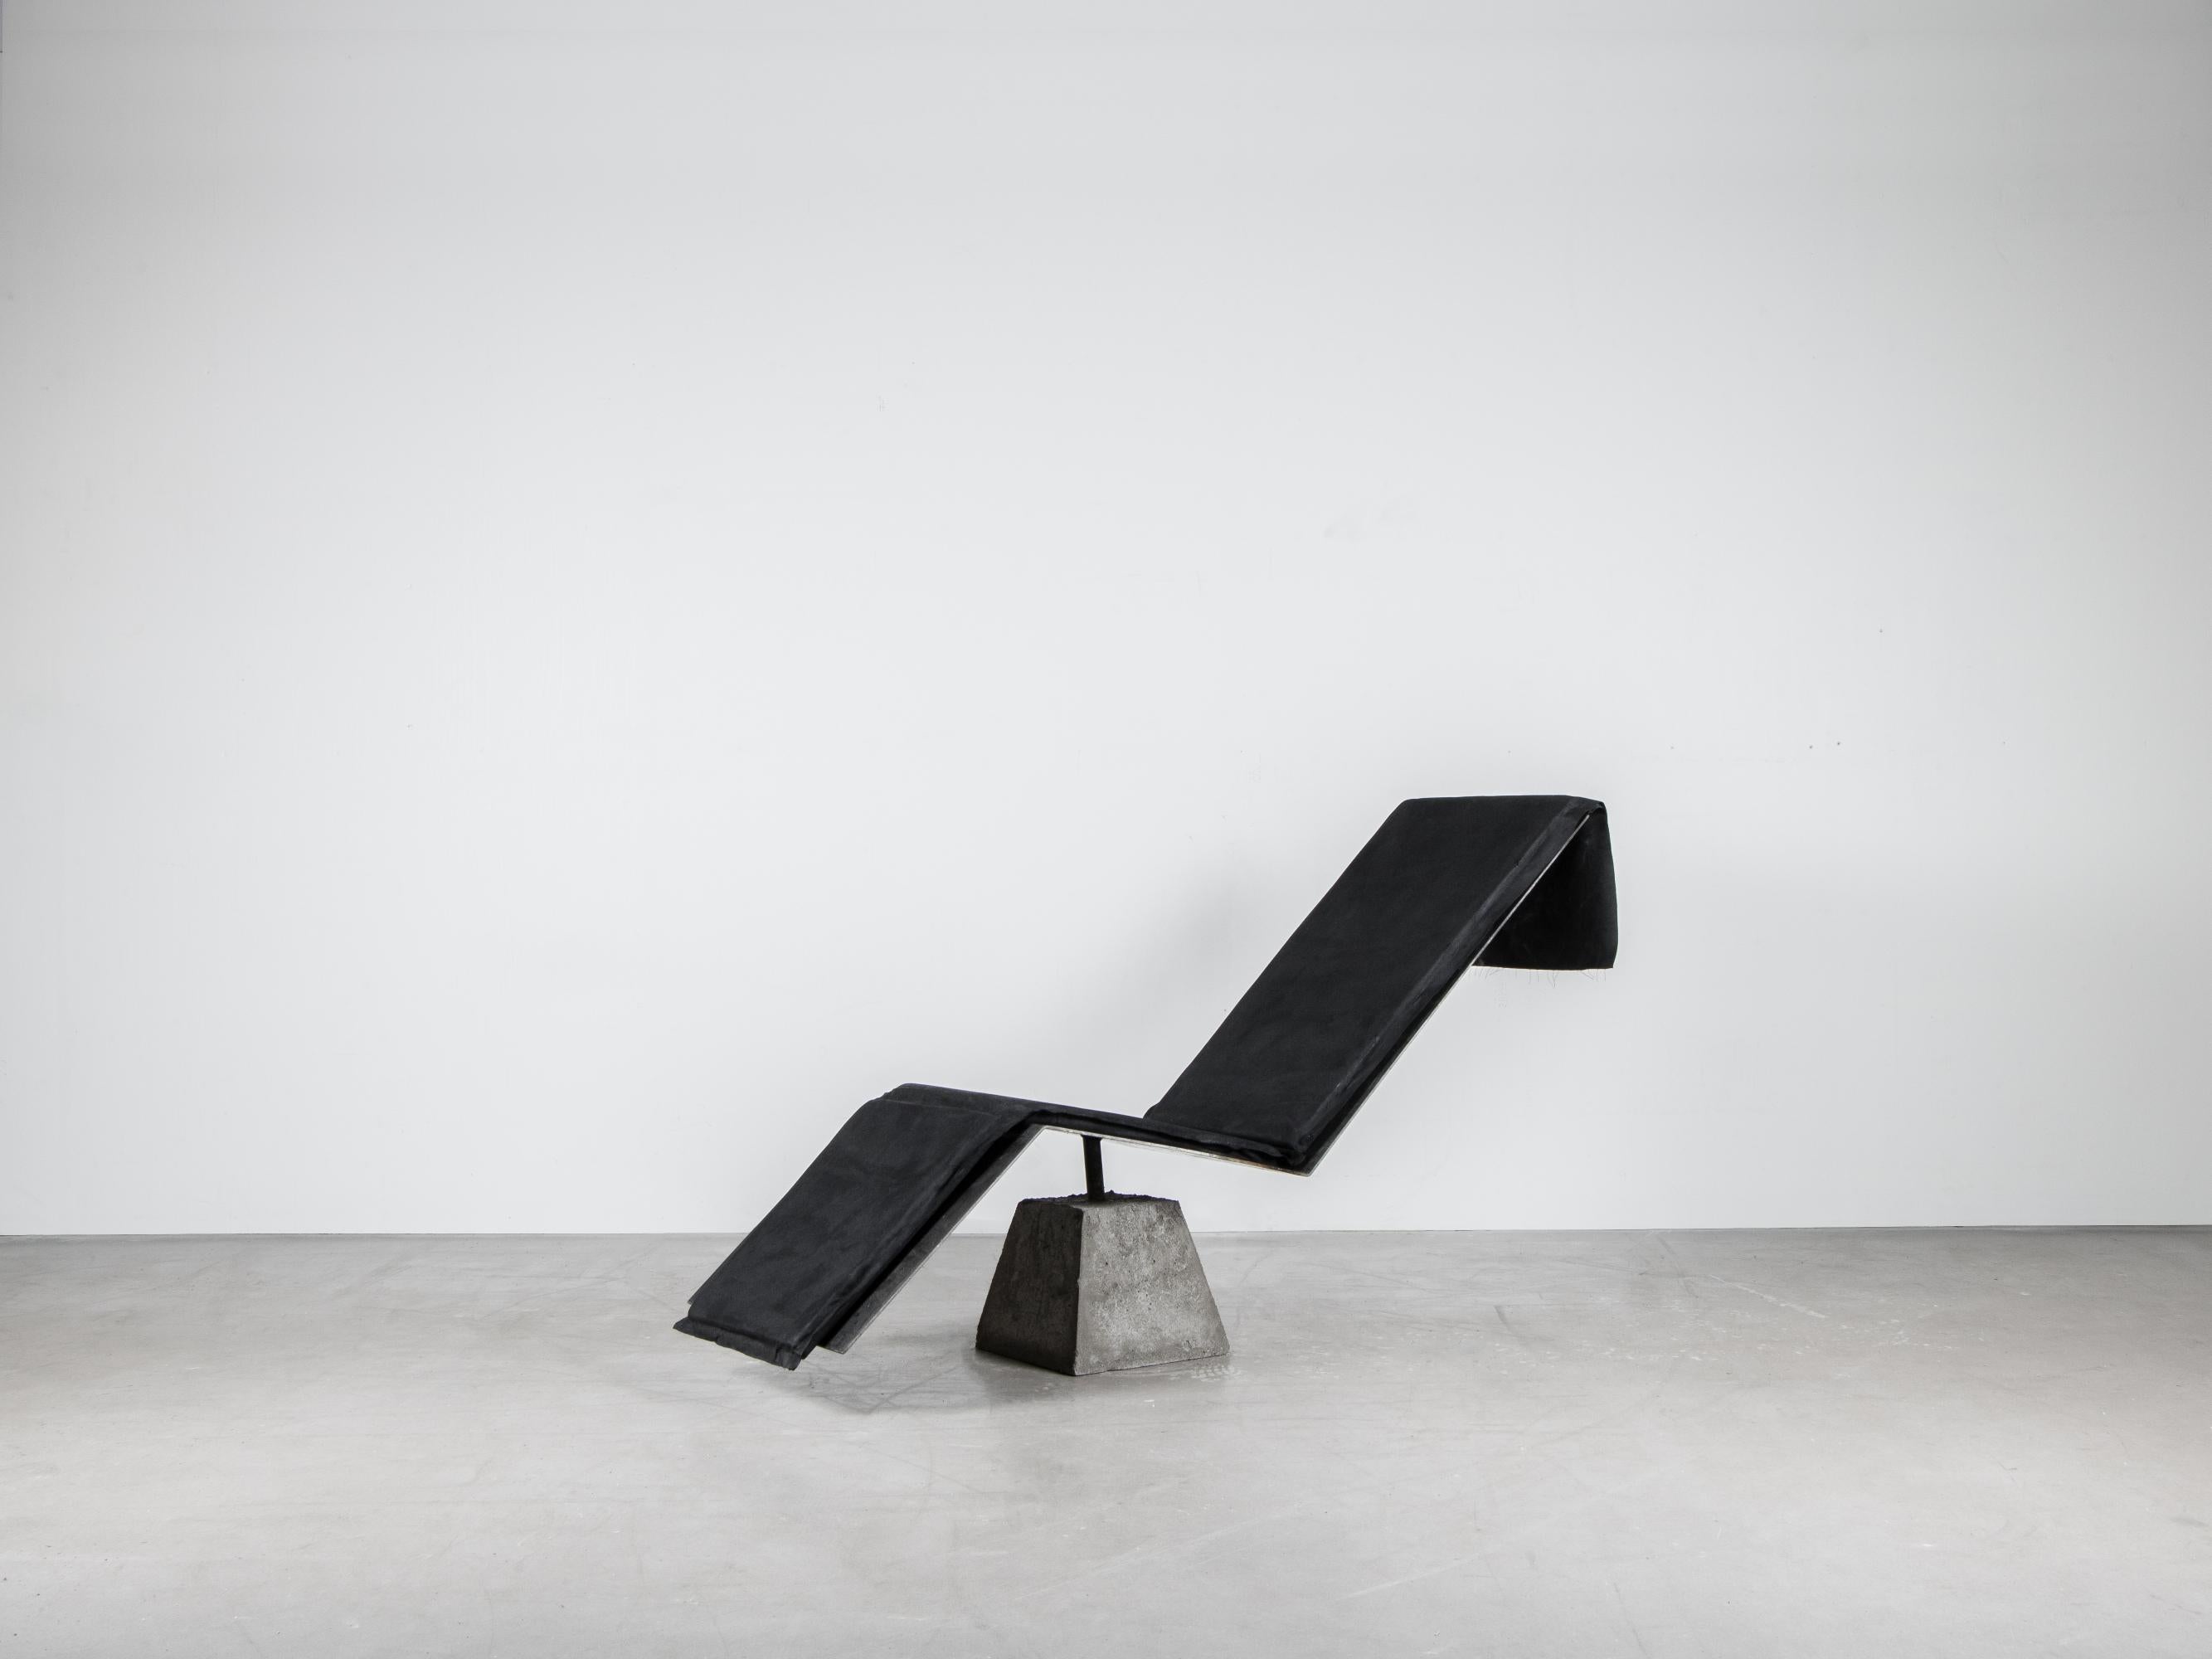 Flykt chair by Lucas Tyra Morten
2020
Limited edition of 17
Dimensions: 150 H, 83 W 50 cm
Material: Concrete, burned waxed steel and hand-waxed upholstered cushion

With the vision to build a monument for escapism, flykt chair was sculpted from a